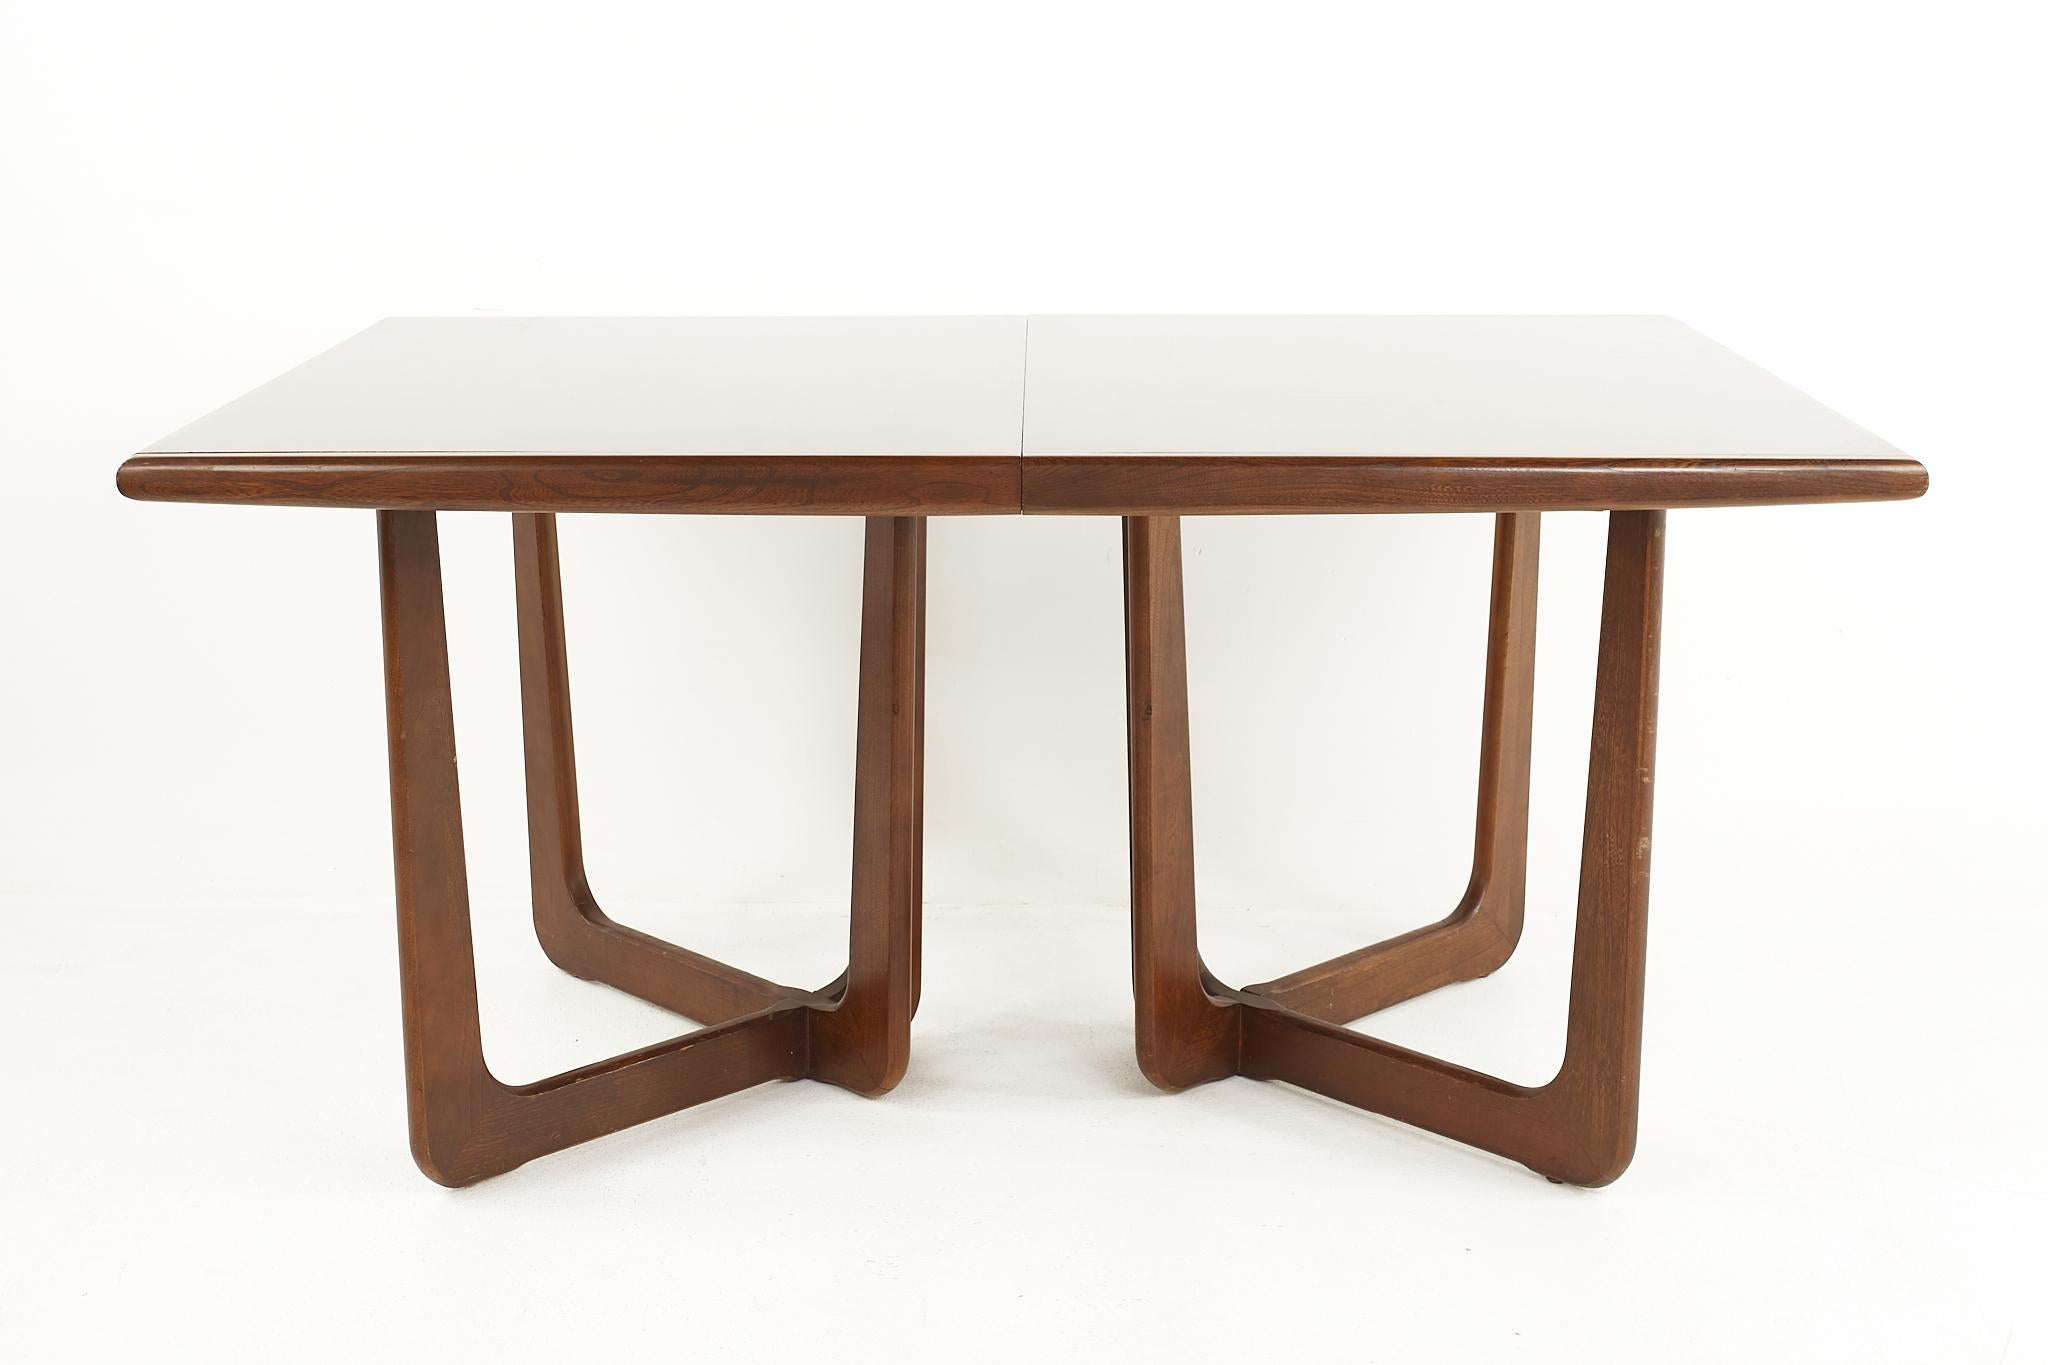 Adrian Pearsall style mid century walnut dining table

The table measures: 62 wide x 42 deep x 29.25 inches high, with a chair clearance of 27 inches; the leaf is 12 inches wide, making a maximum table width of 74 inches when the leaf is used